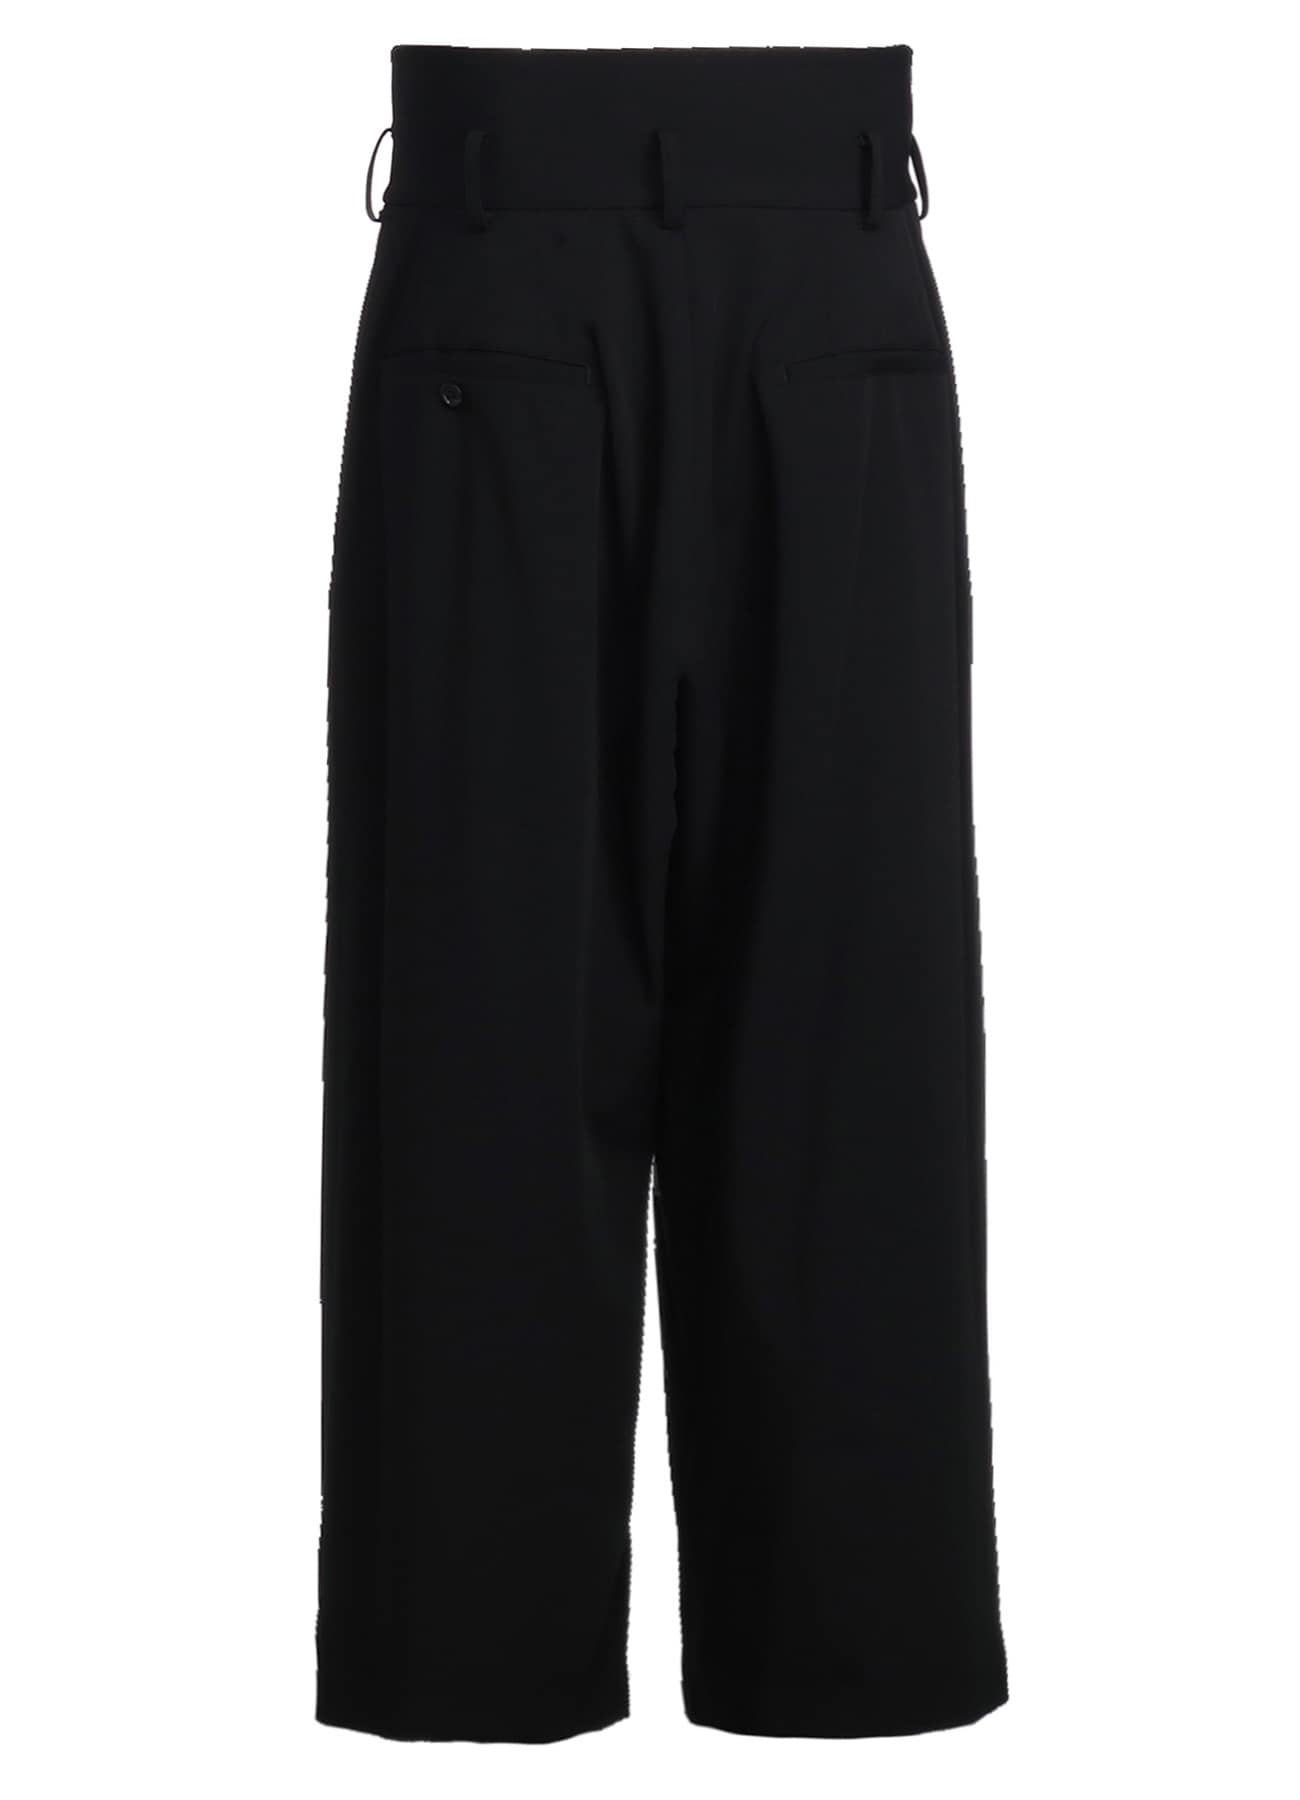 PE/RAYON GABARDINE STRETCH 2 TUCK TAPERED WIDE PANTS WITH A BUTTON SLIT AT THE HEM